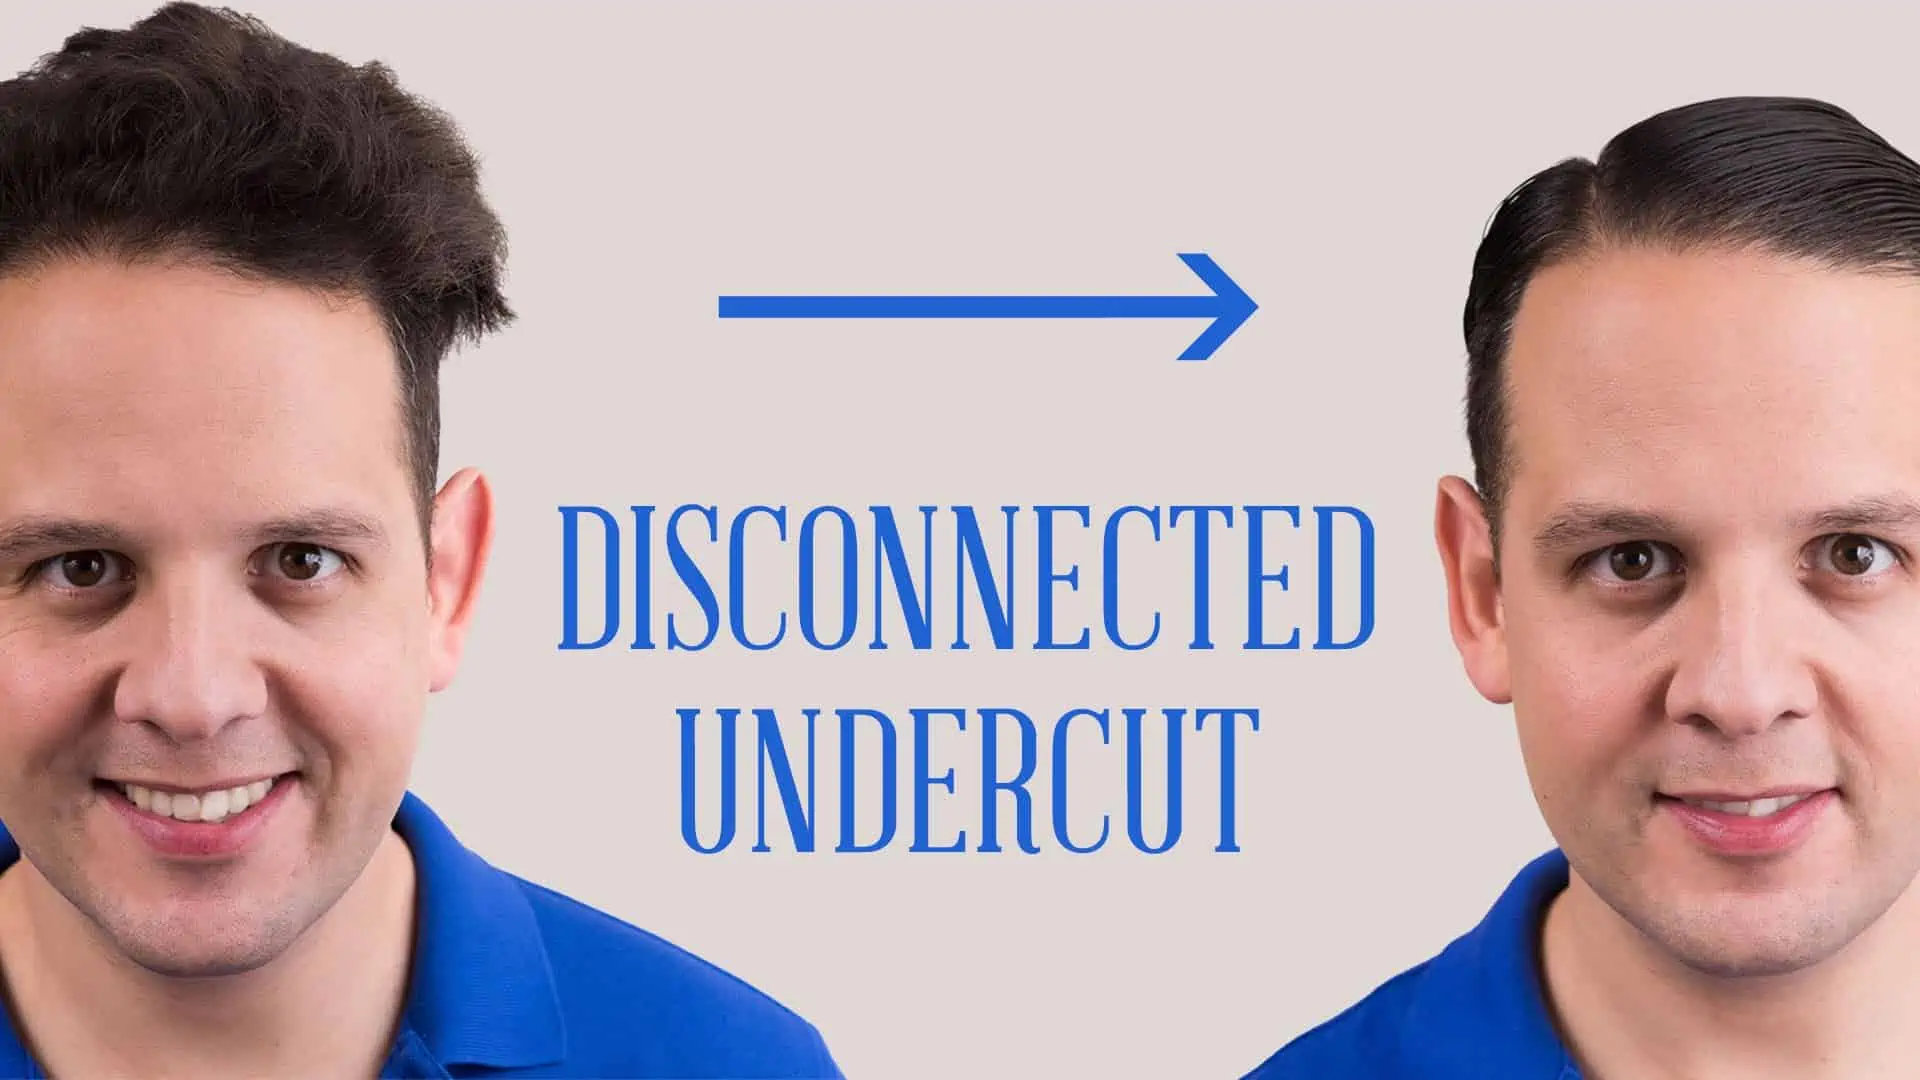 10 Popular Disconnected Undercut Haircut Ideas - Style In Budget